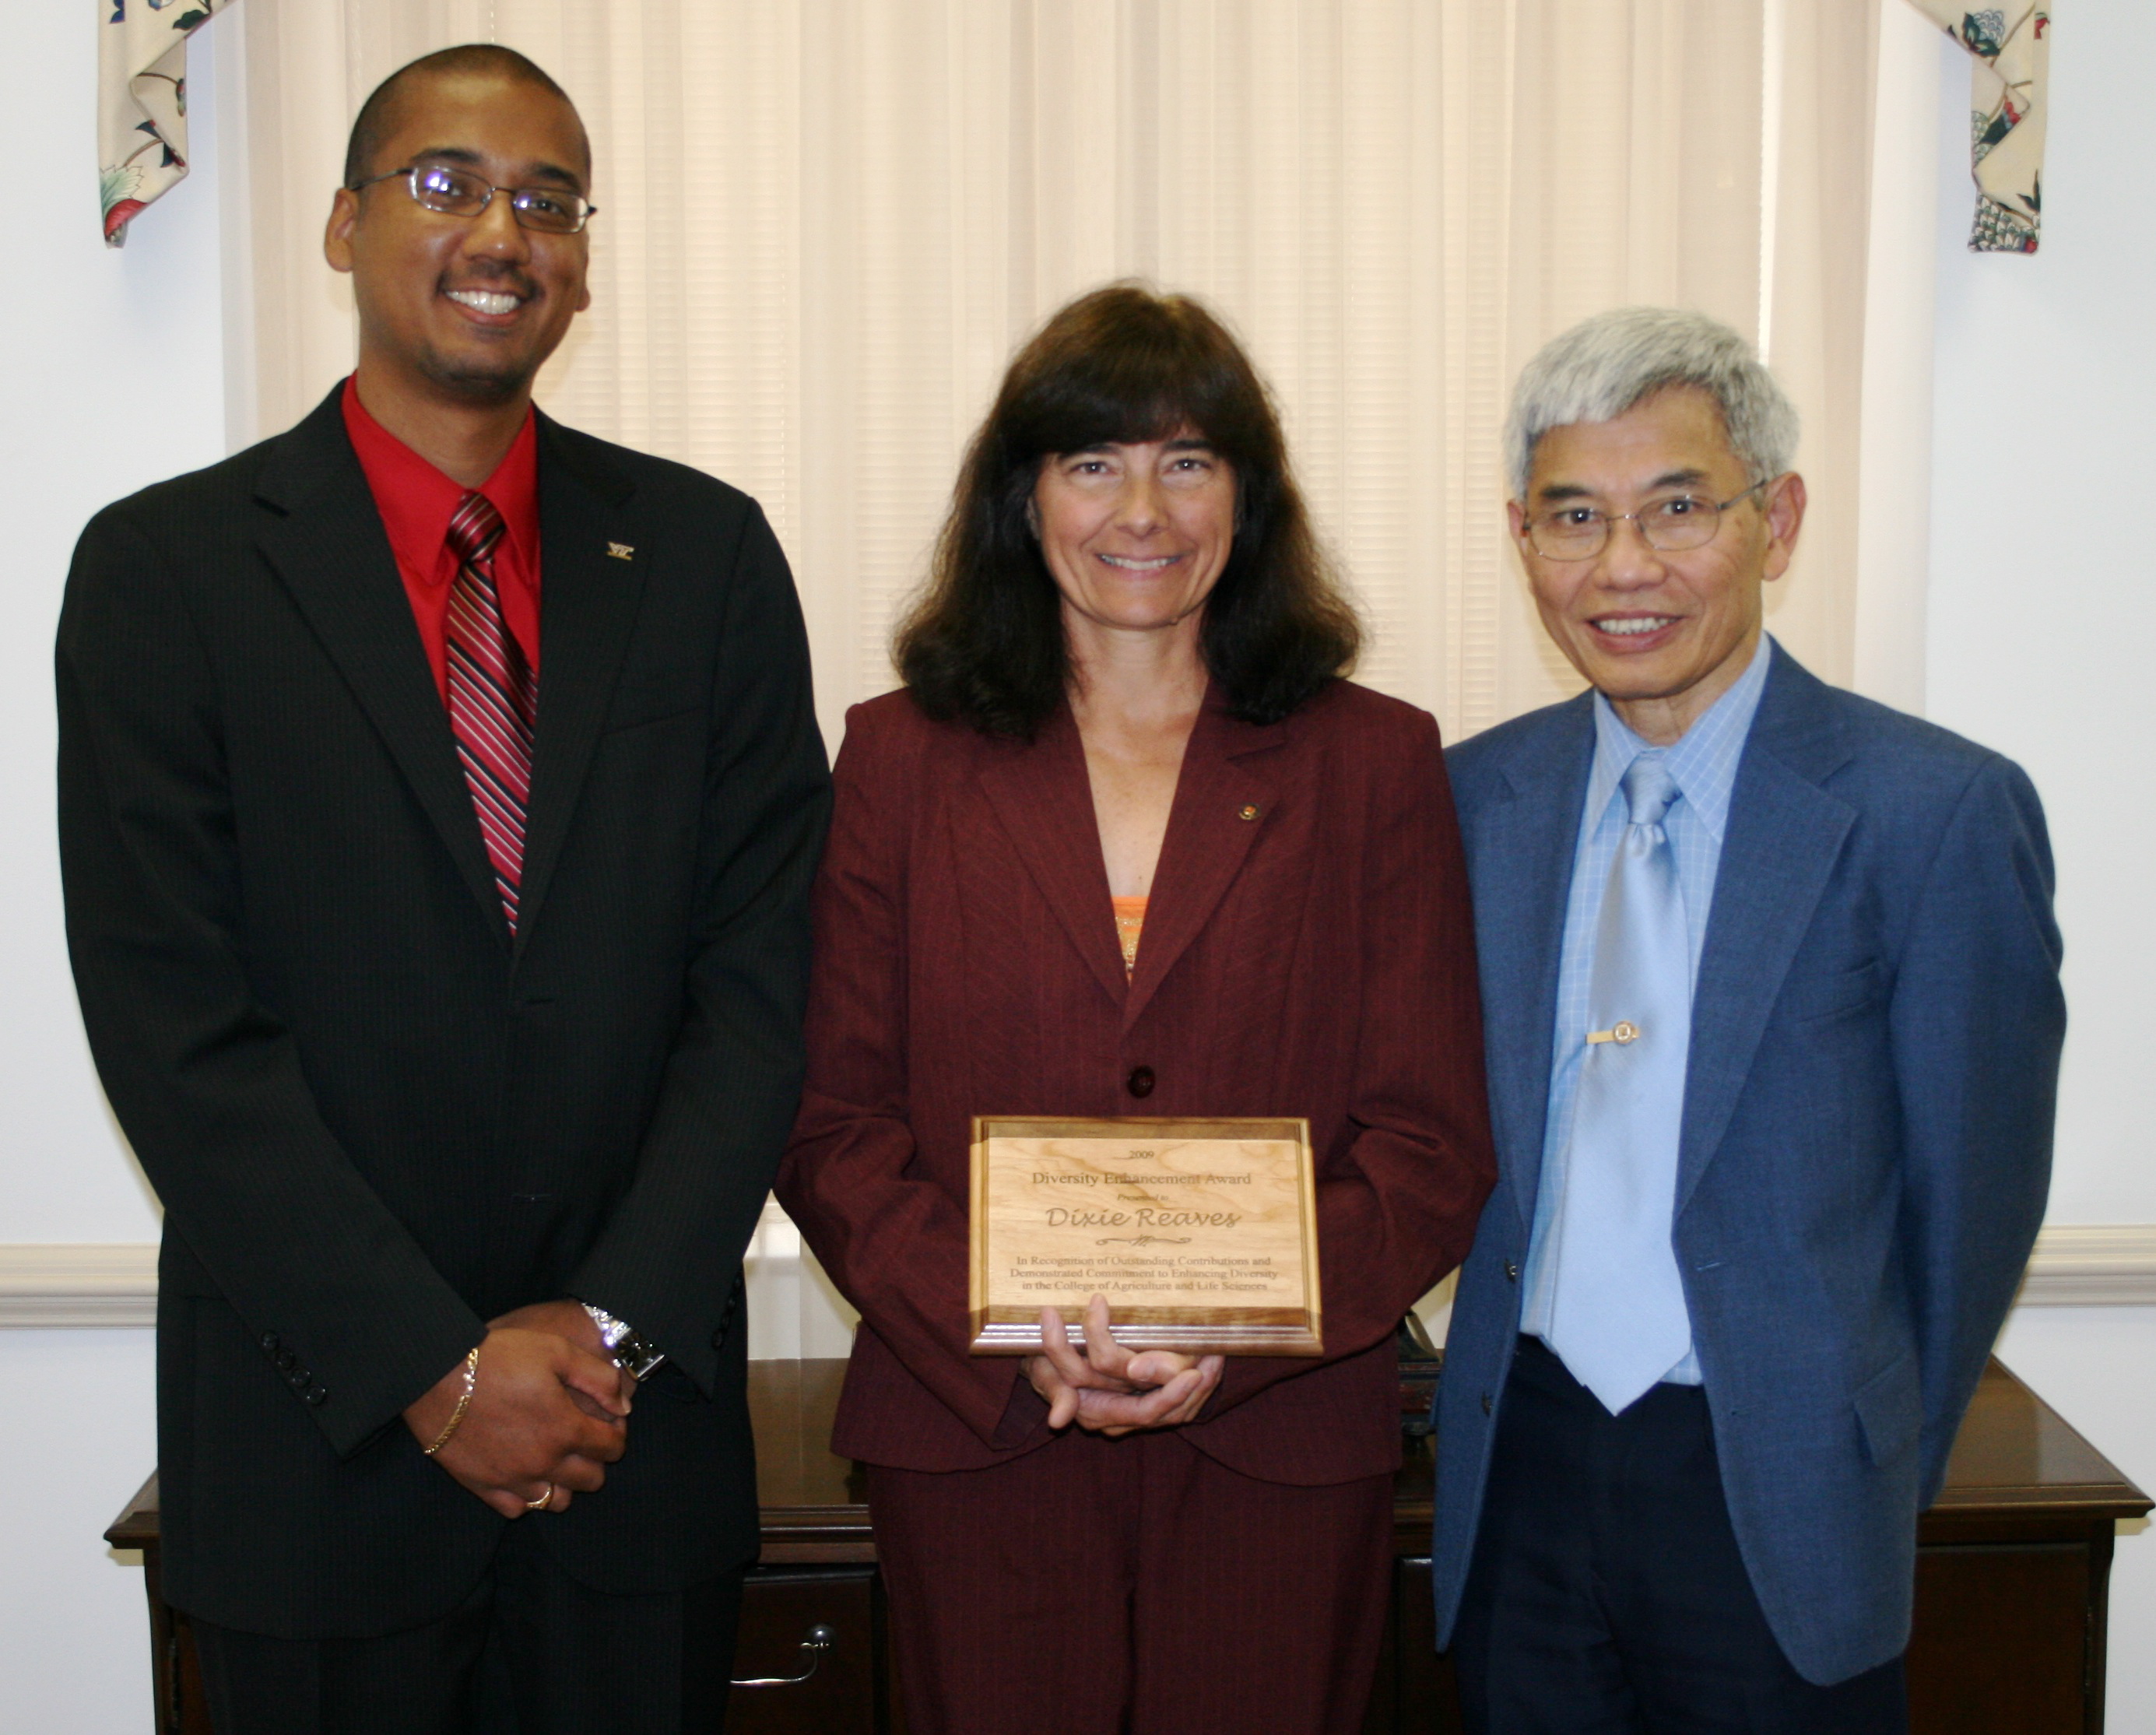 Ray Ali, associate director of field operations for the Virginia Cooperative Extension (left), and Loke T. Kok (right), interim dean of the College of Agriculture and Life Science, presents Dixie Watts Reaves the Diversity Enhancement Award.